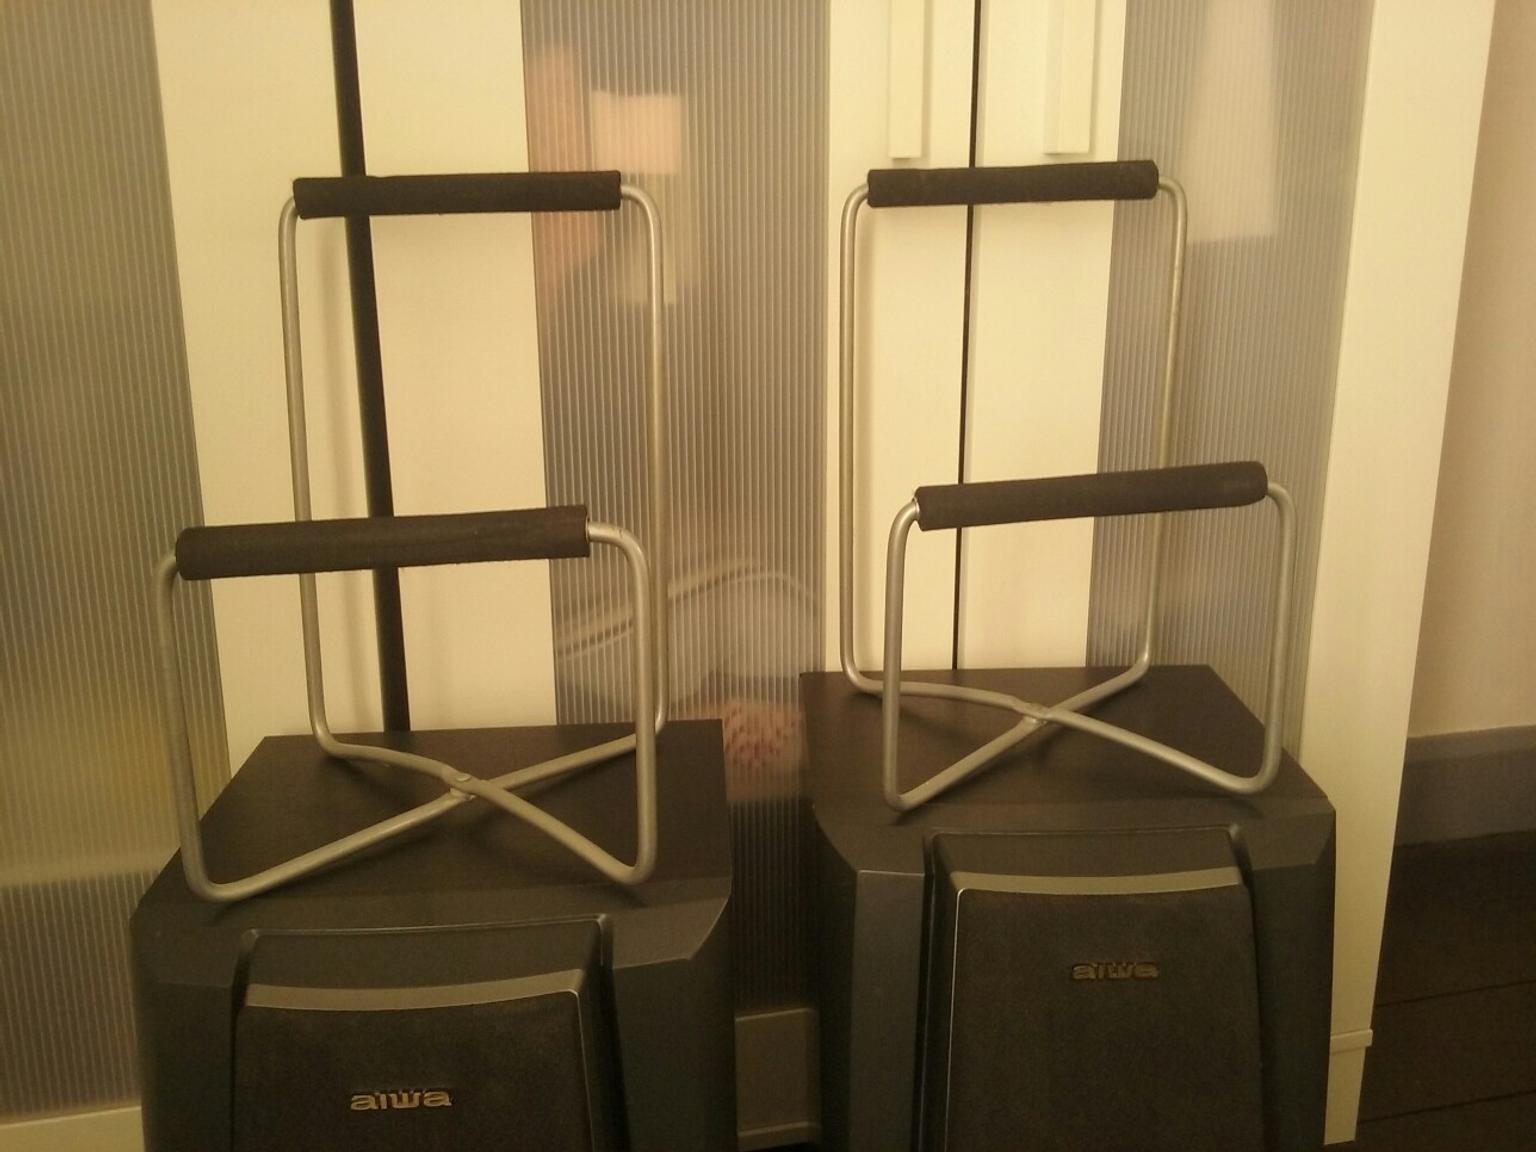 Aiwa Floor Subwoofer Speakers With Stands In Np16 Bulwark Fur 35